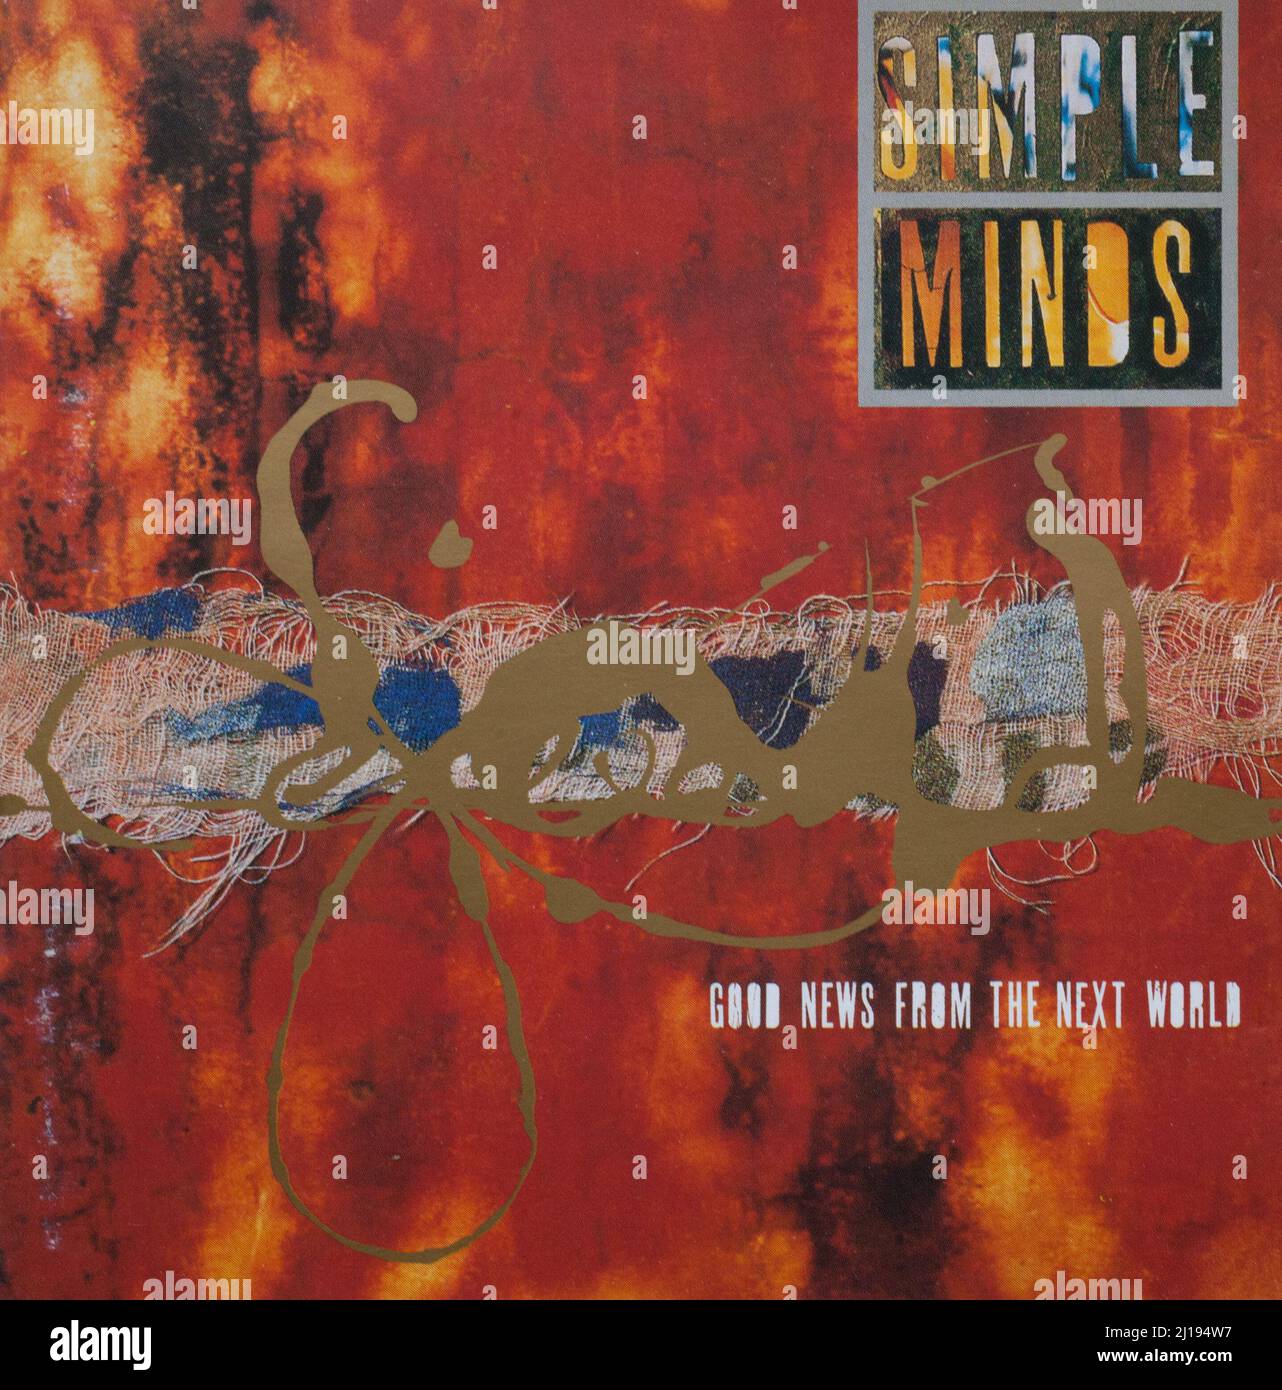 The Cd album cover to Good news from the next world by Simple Minds Stock Photo